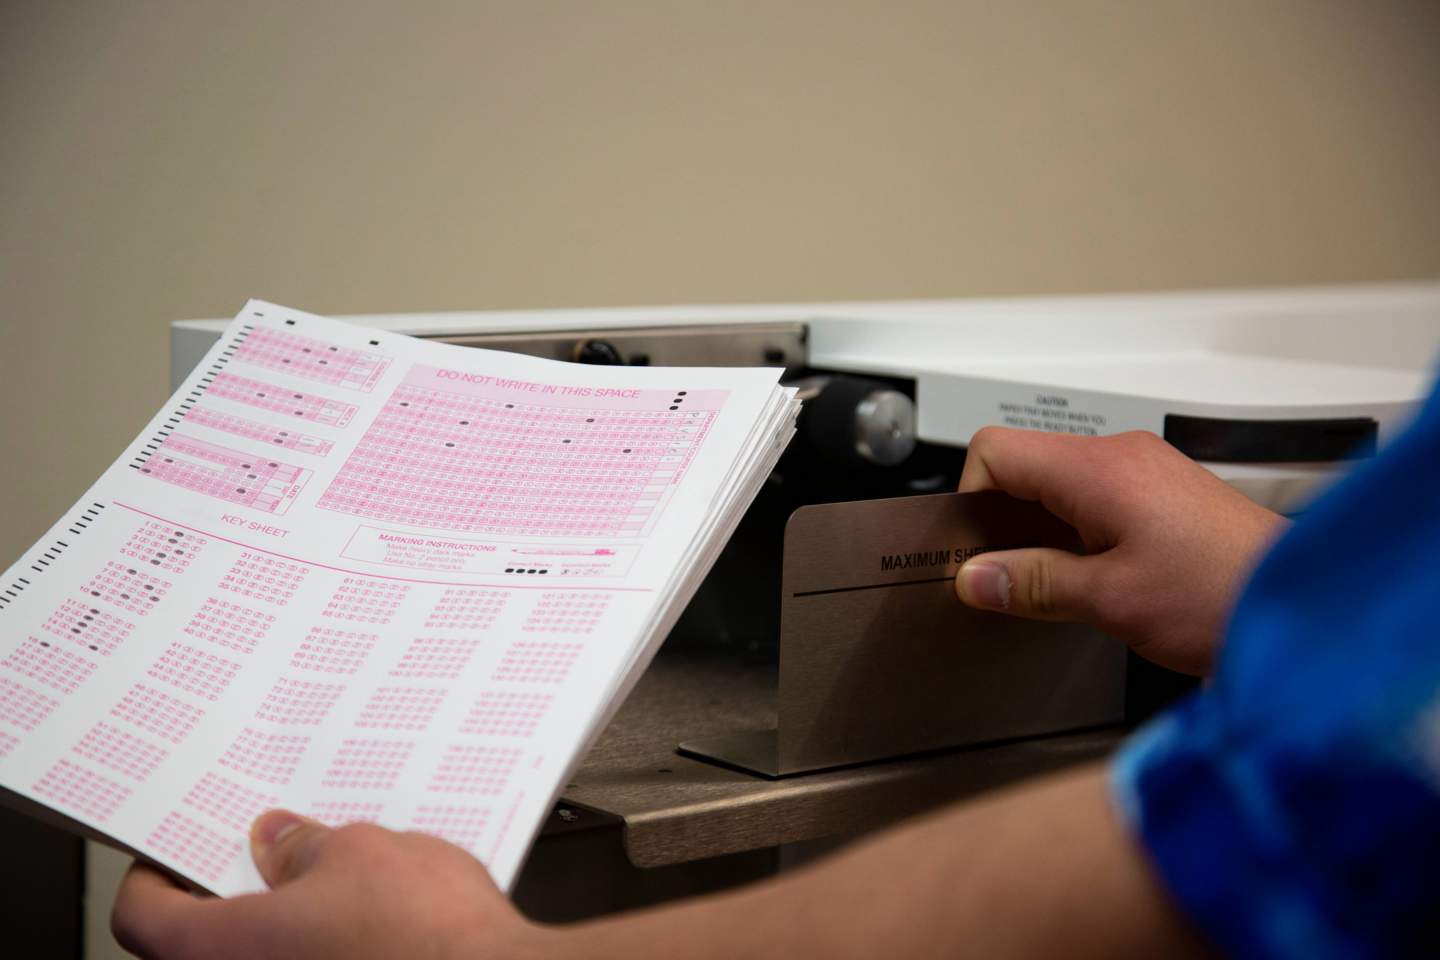 Feeding scantron forms to a Scanner